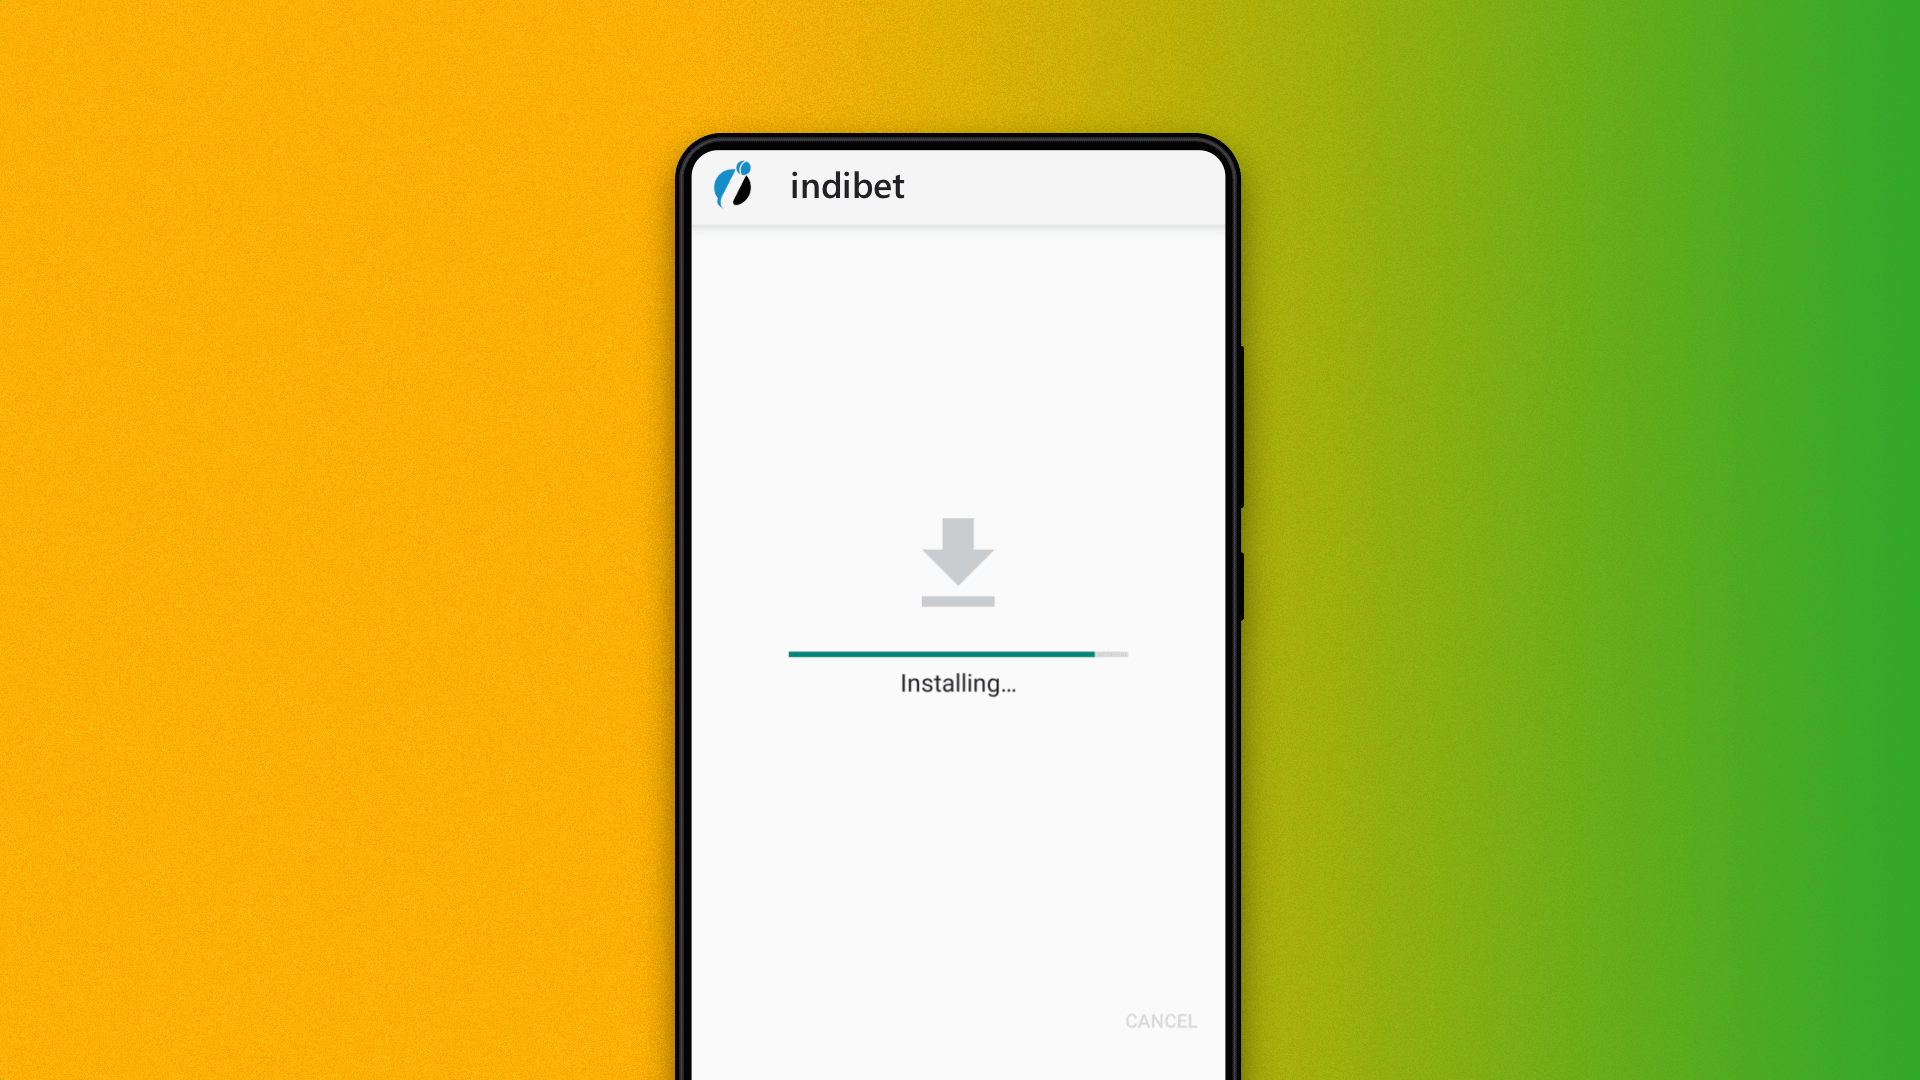 The process of installing the Indibet mobile app on an Android smartphone